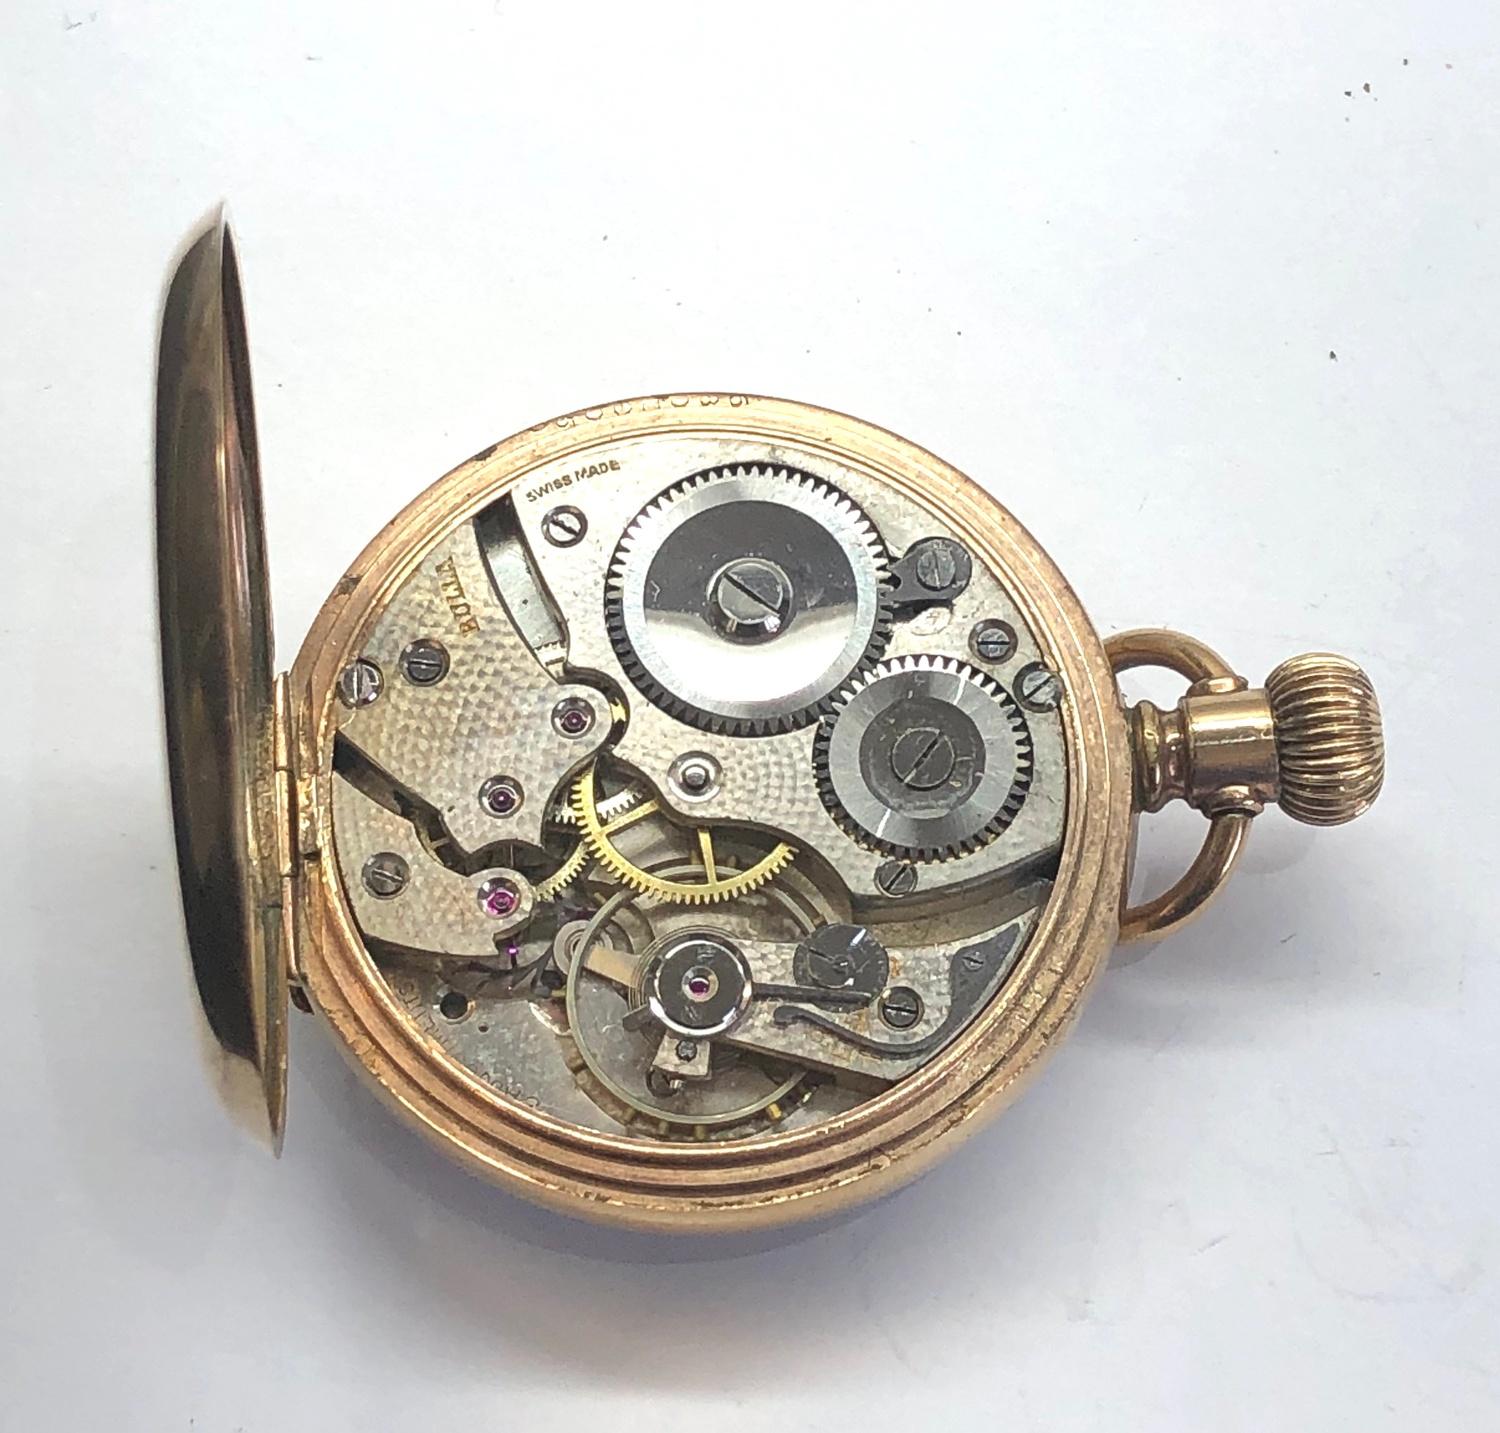 Bulla gold plated open face pocket watch - Image 3 of 3